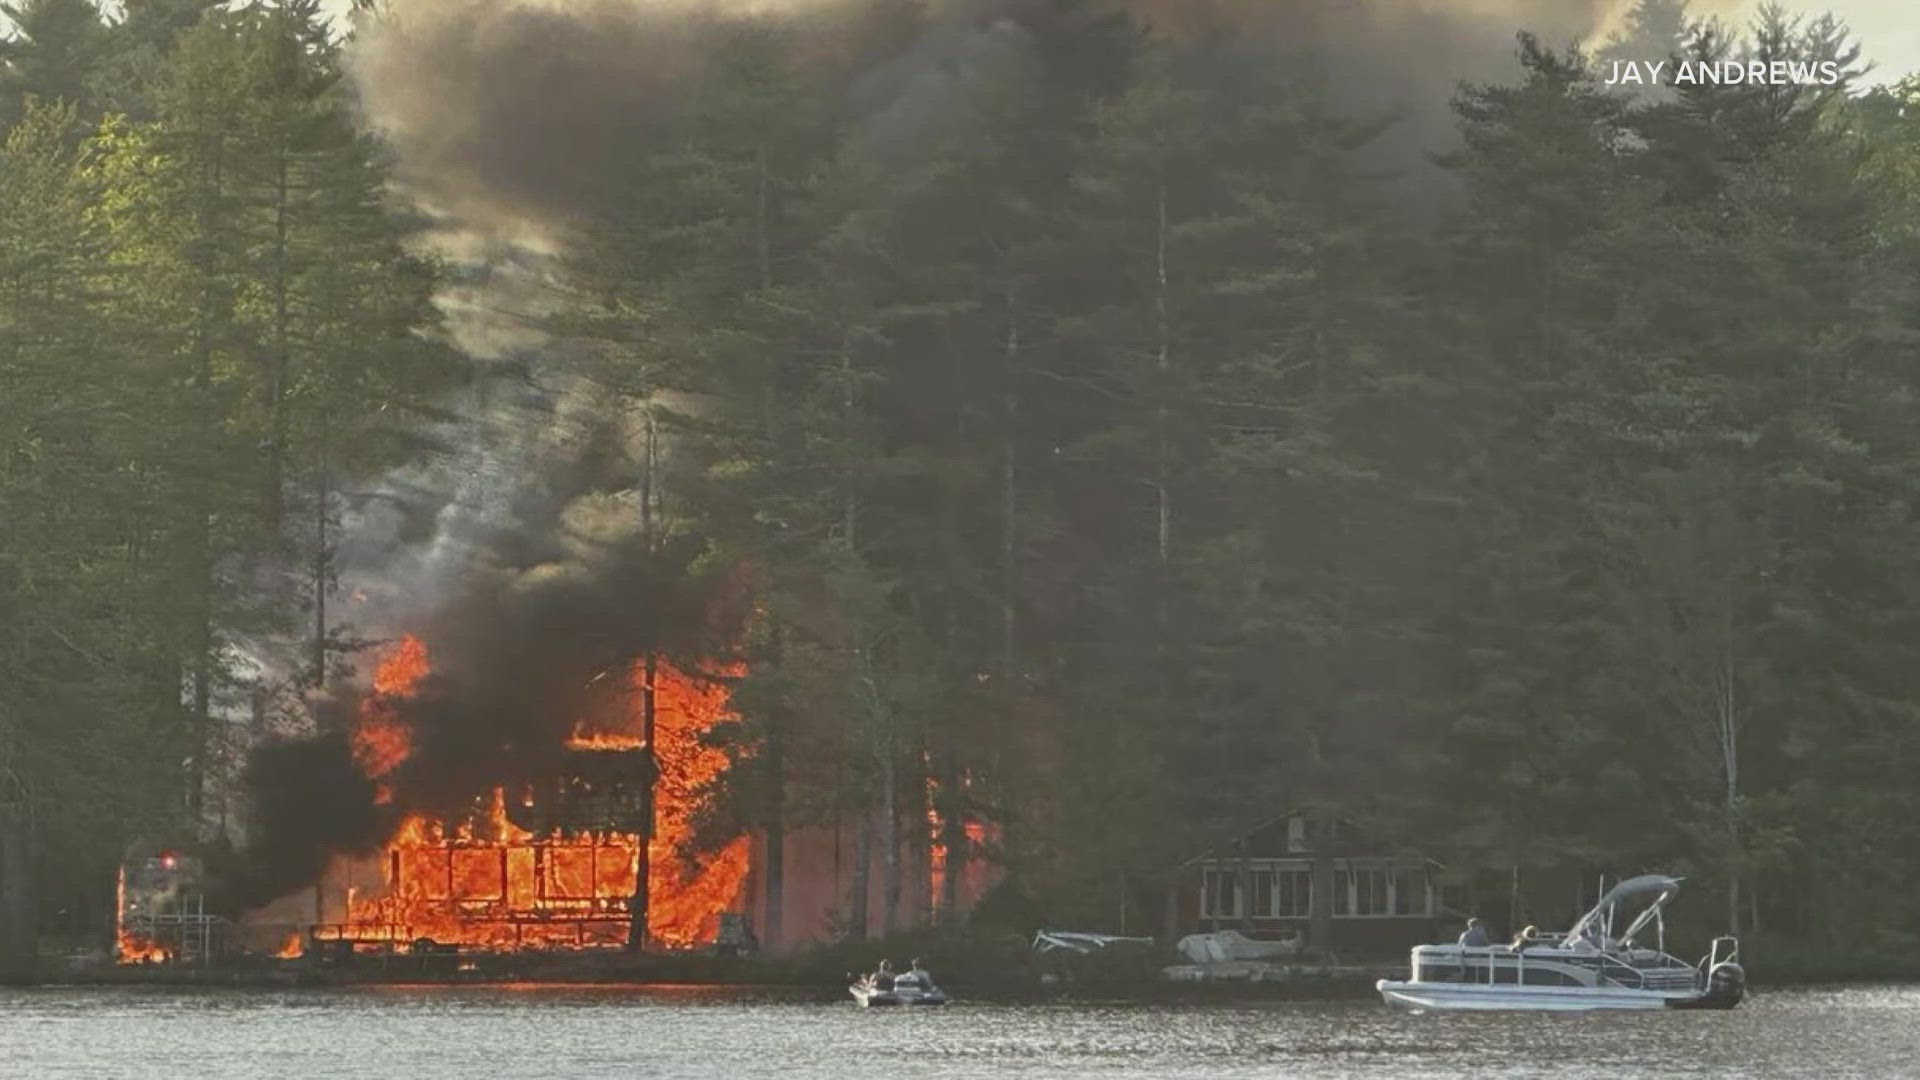 Officials at the scene told NEWS CENTER Maine three homes were involved in the blaze, and a number of firefighters were treated for injuries.